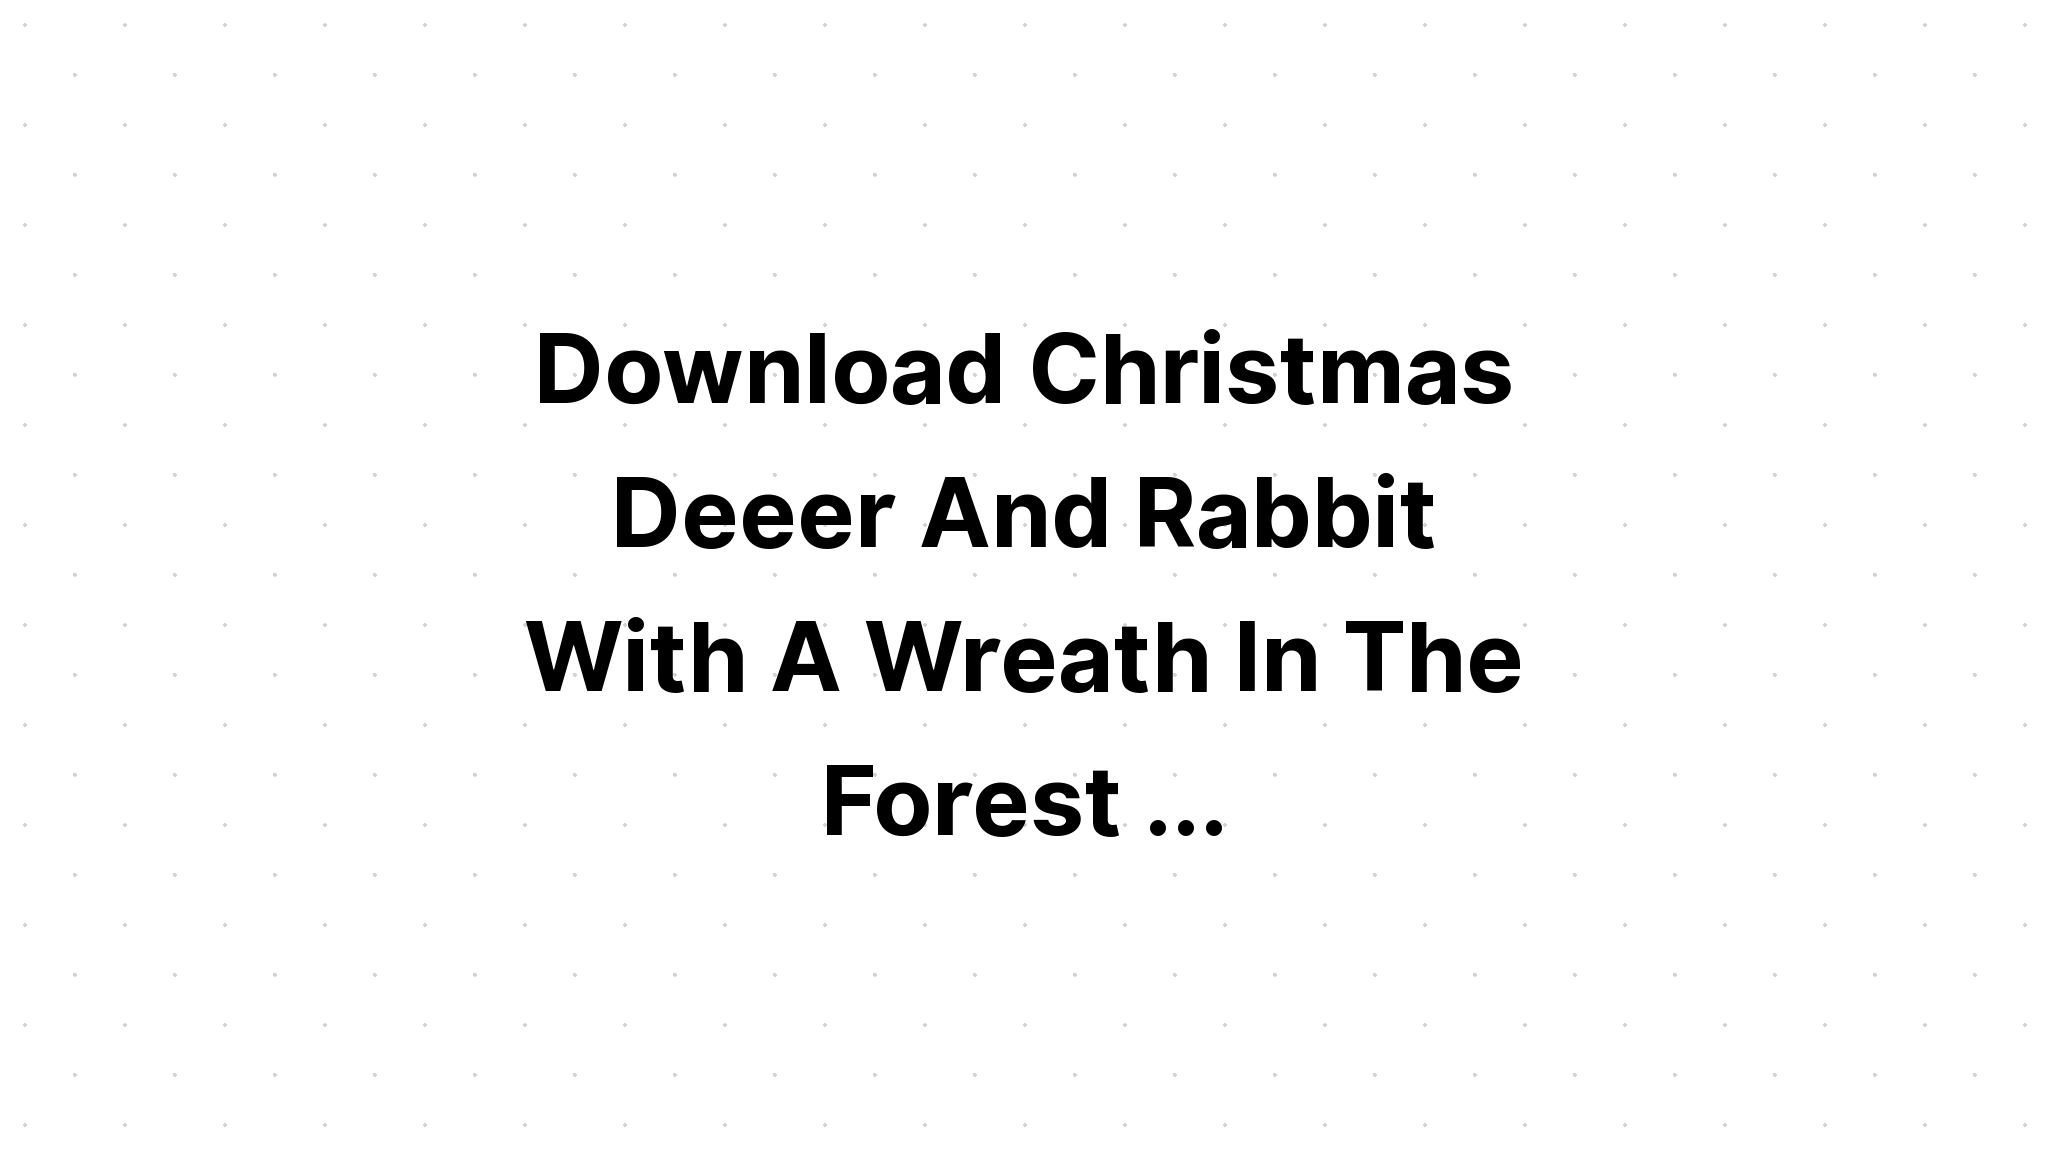 Download Christmas Design With Deer And Bunny SVG File